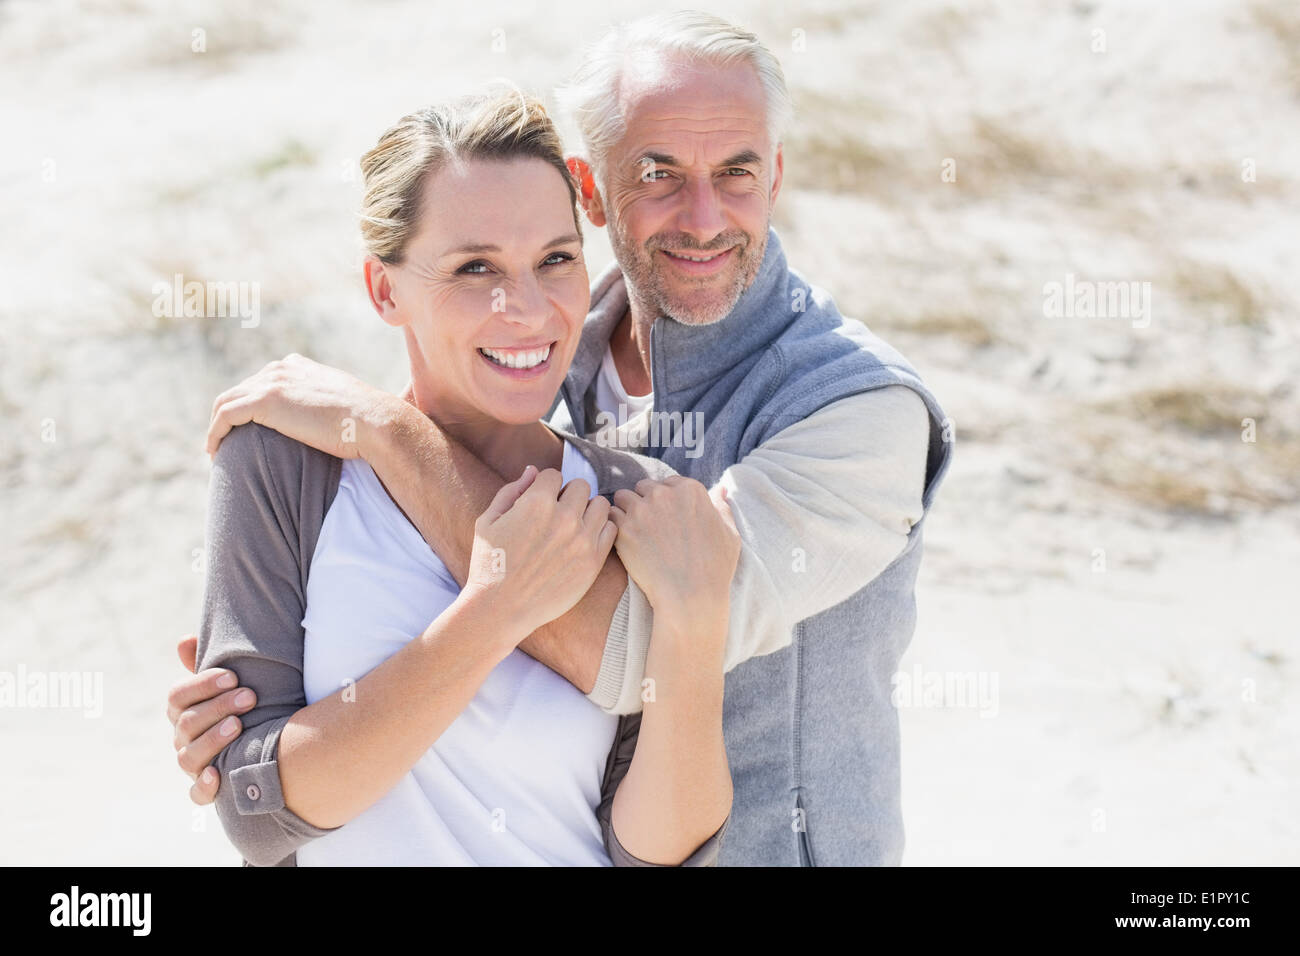 Happy hugging couple on the beach looking at camera Stock Photo